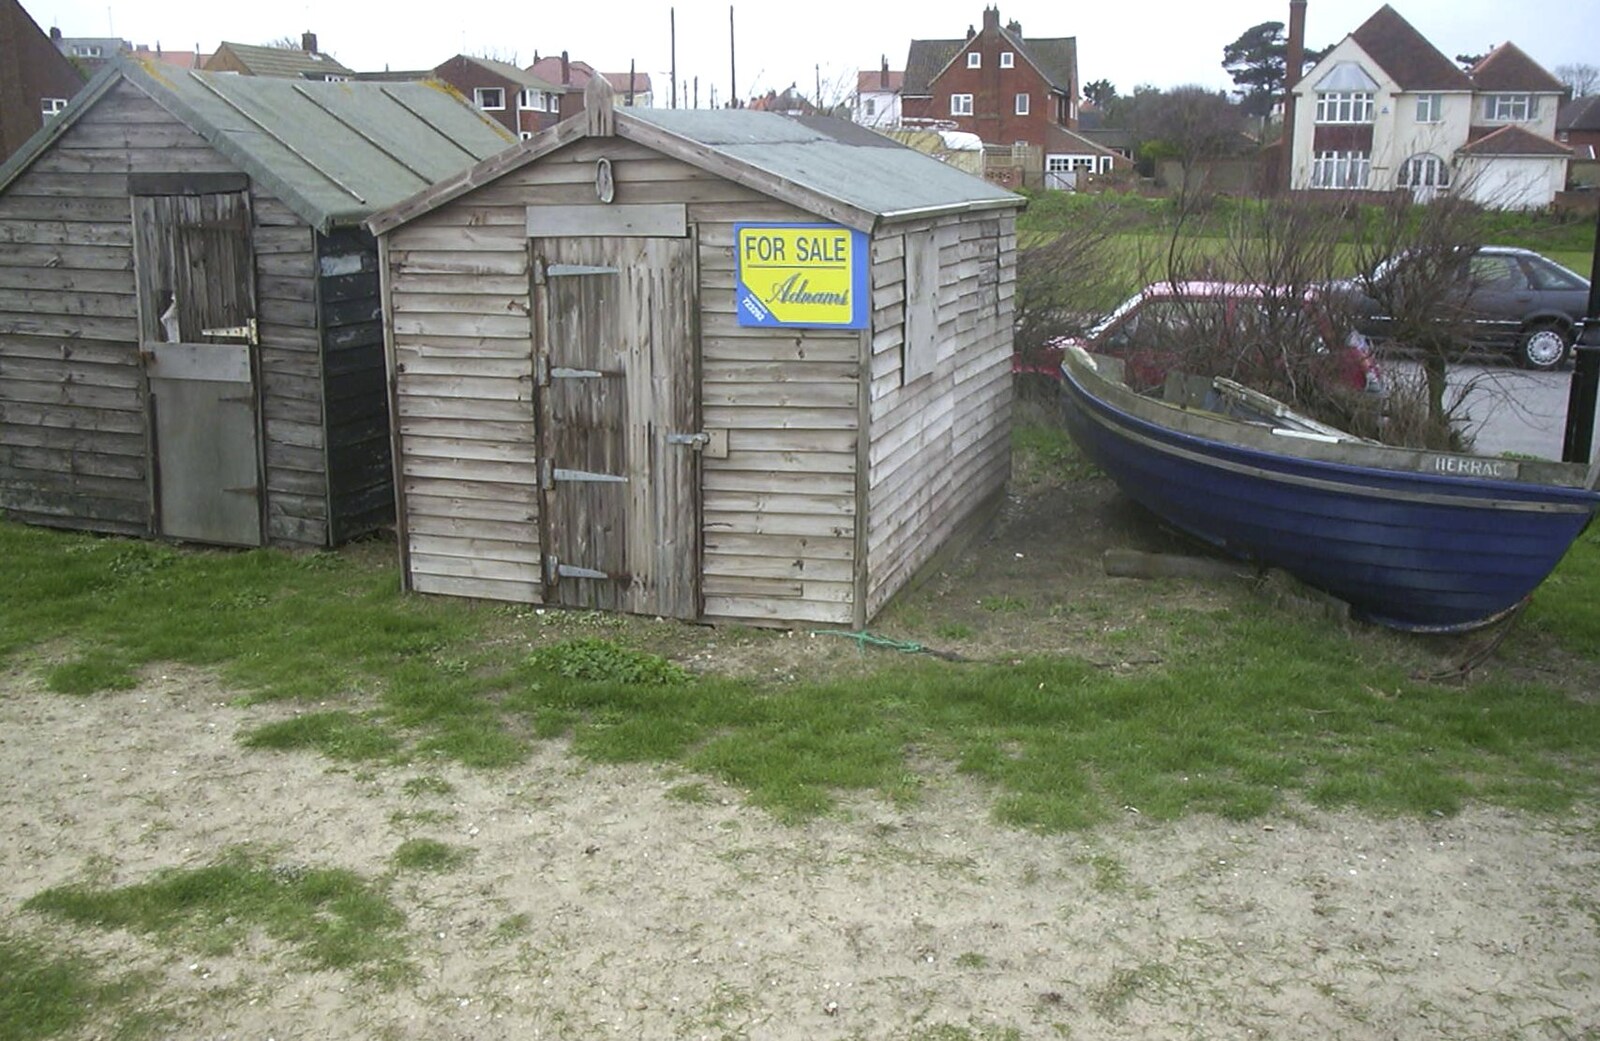 A shed for sale on the sea front from Moping in Southwold, Suffolk - 3rd April 2004